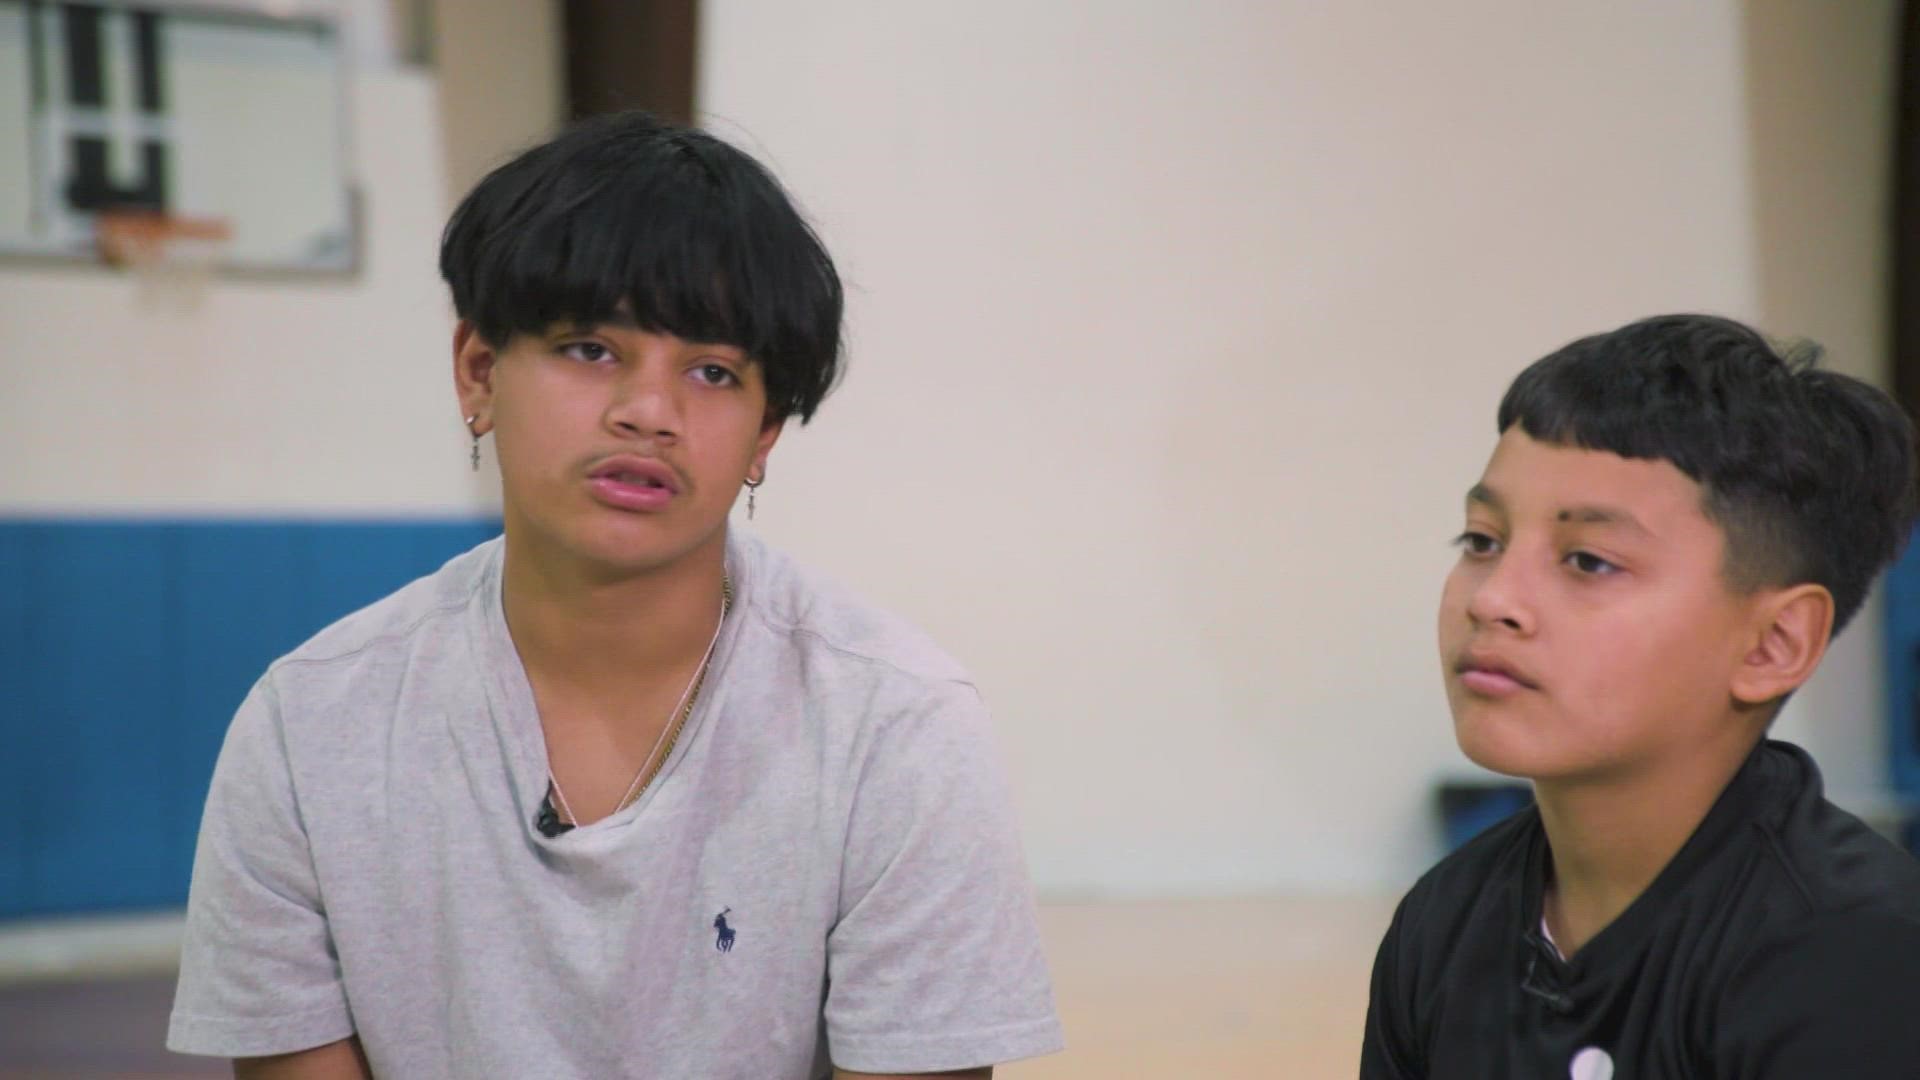 Brothers Julian, 13, and Angel, 11, are huge football and basketball fans who both want a second shot at parents.